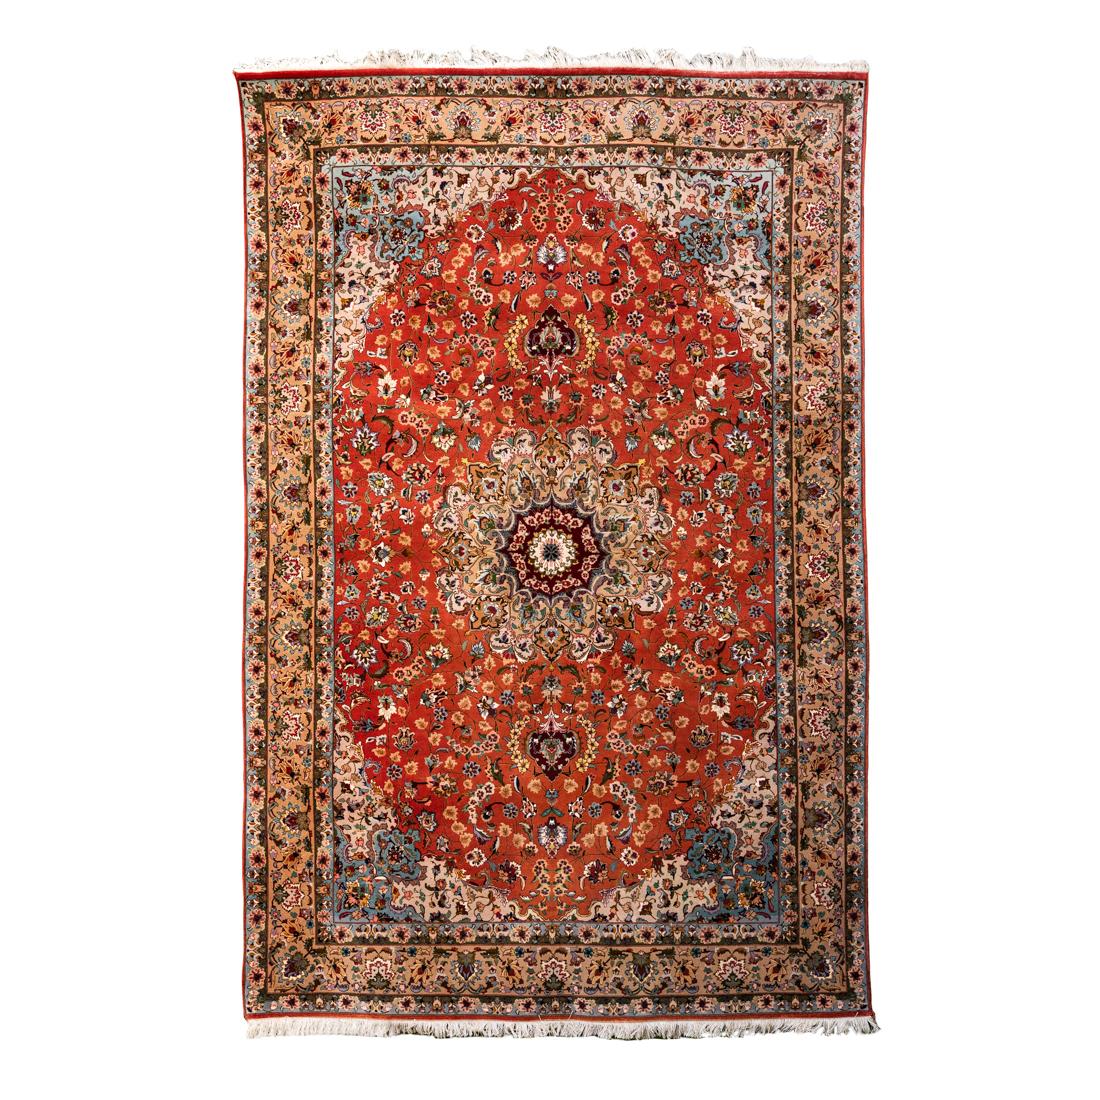 A Tabriz carpet, Northwest Persia
approximately 304 by 203cm; 10ft., 6ft. 6in.
mid-20th century
Embargo On Importation Of Persian/Iranian Works Of Art To The U.S.
Please note that there may be restrictions on importing certain types of property